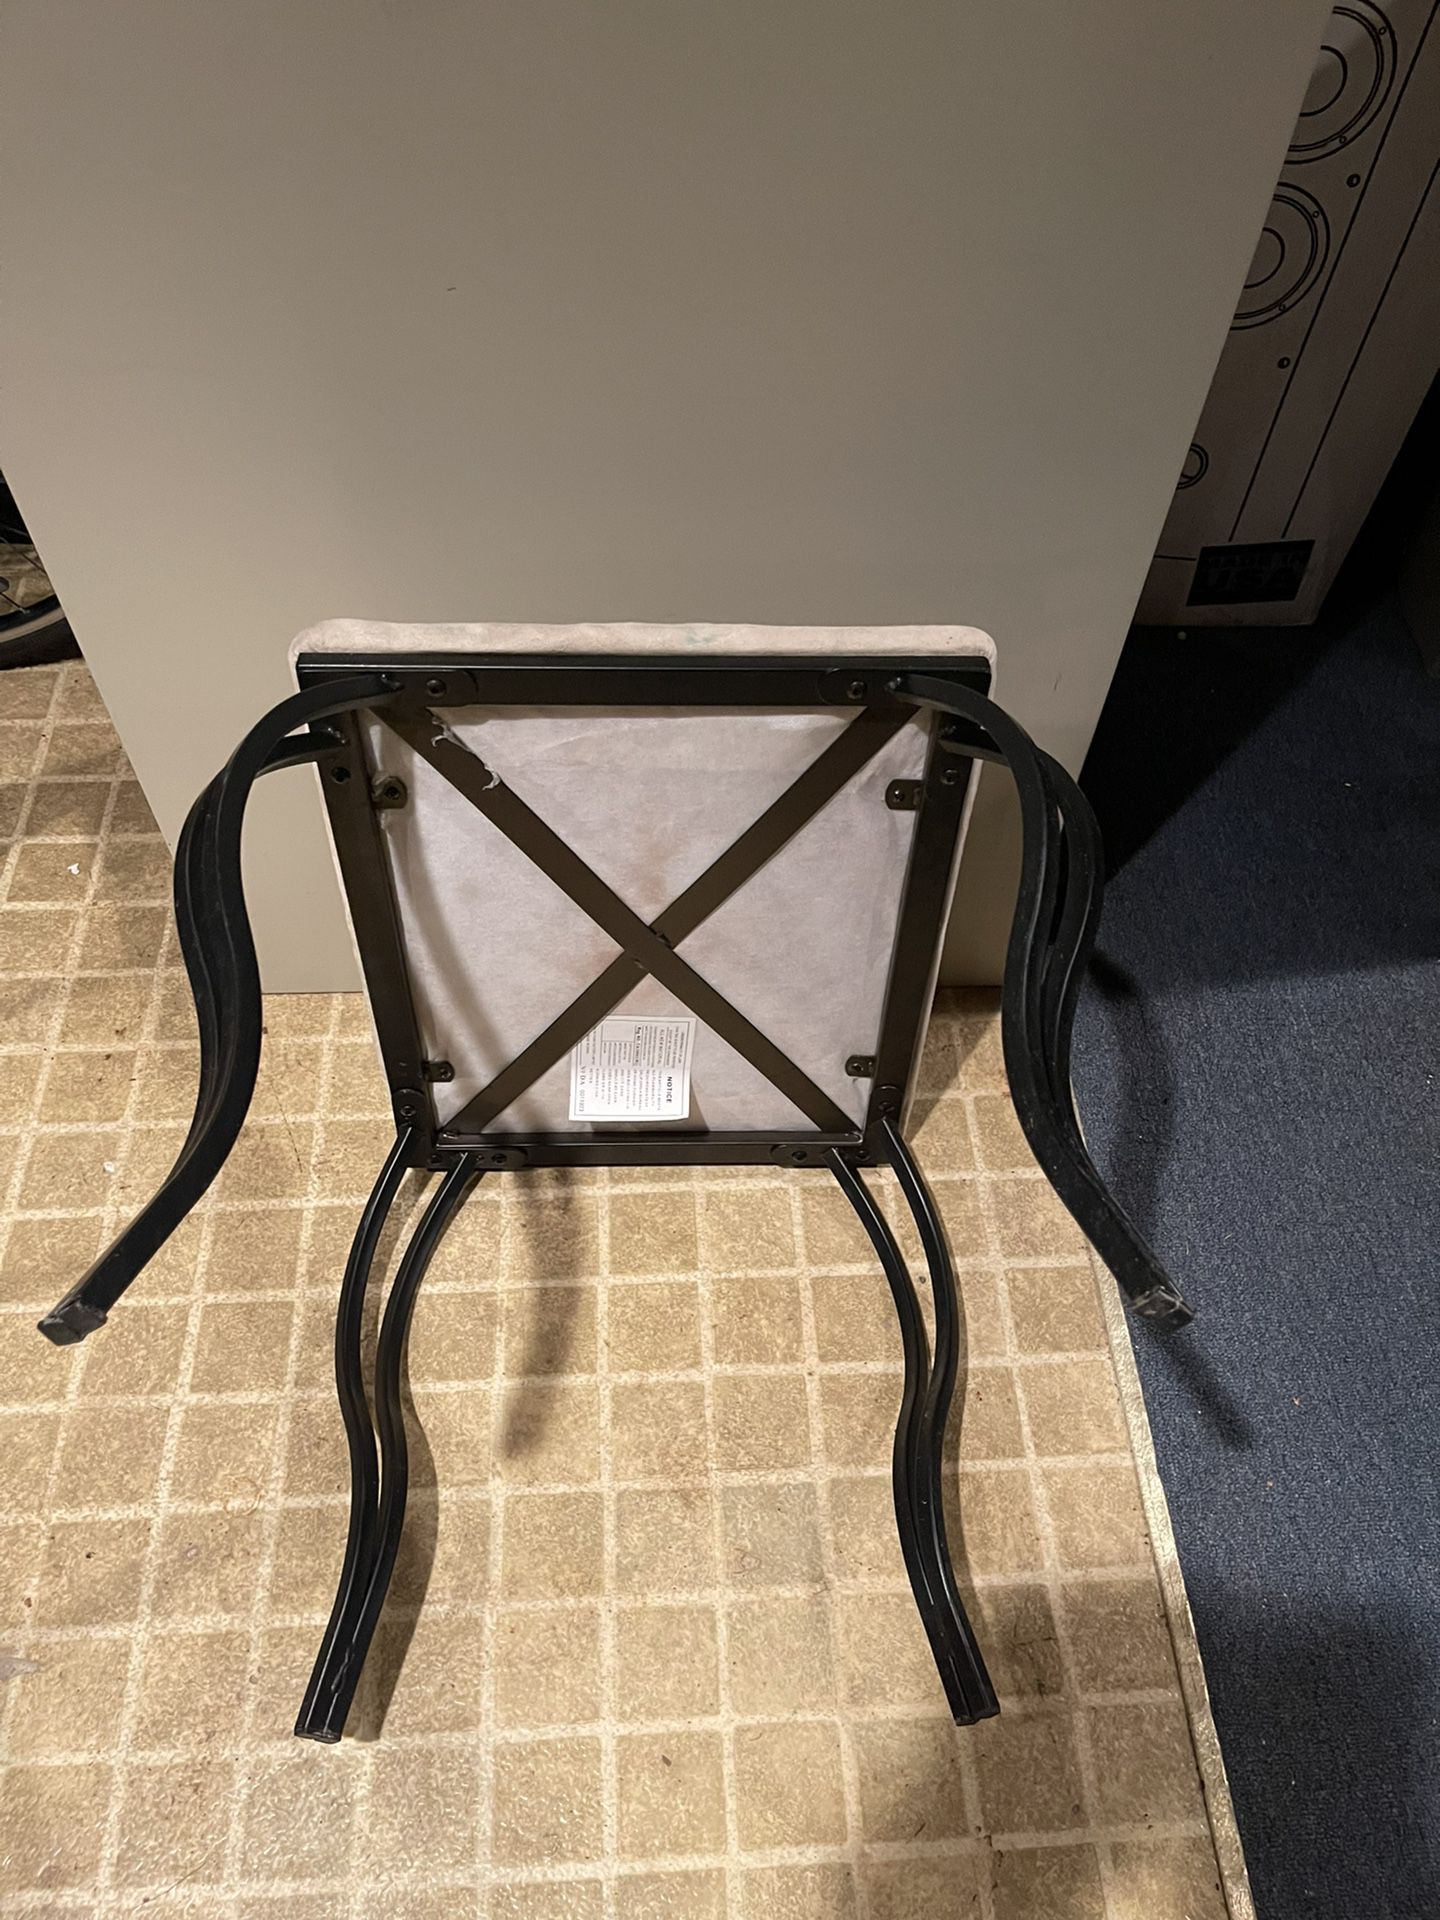 Metal Stool With Cloth Top